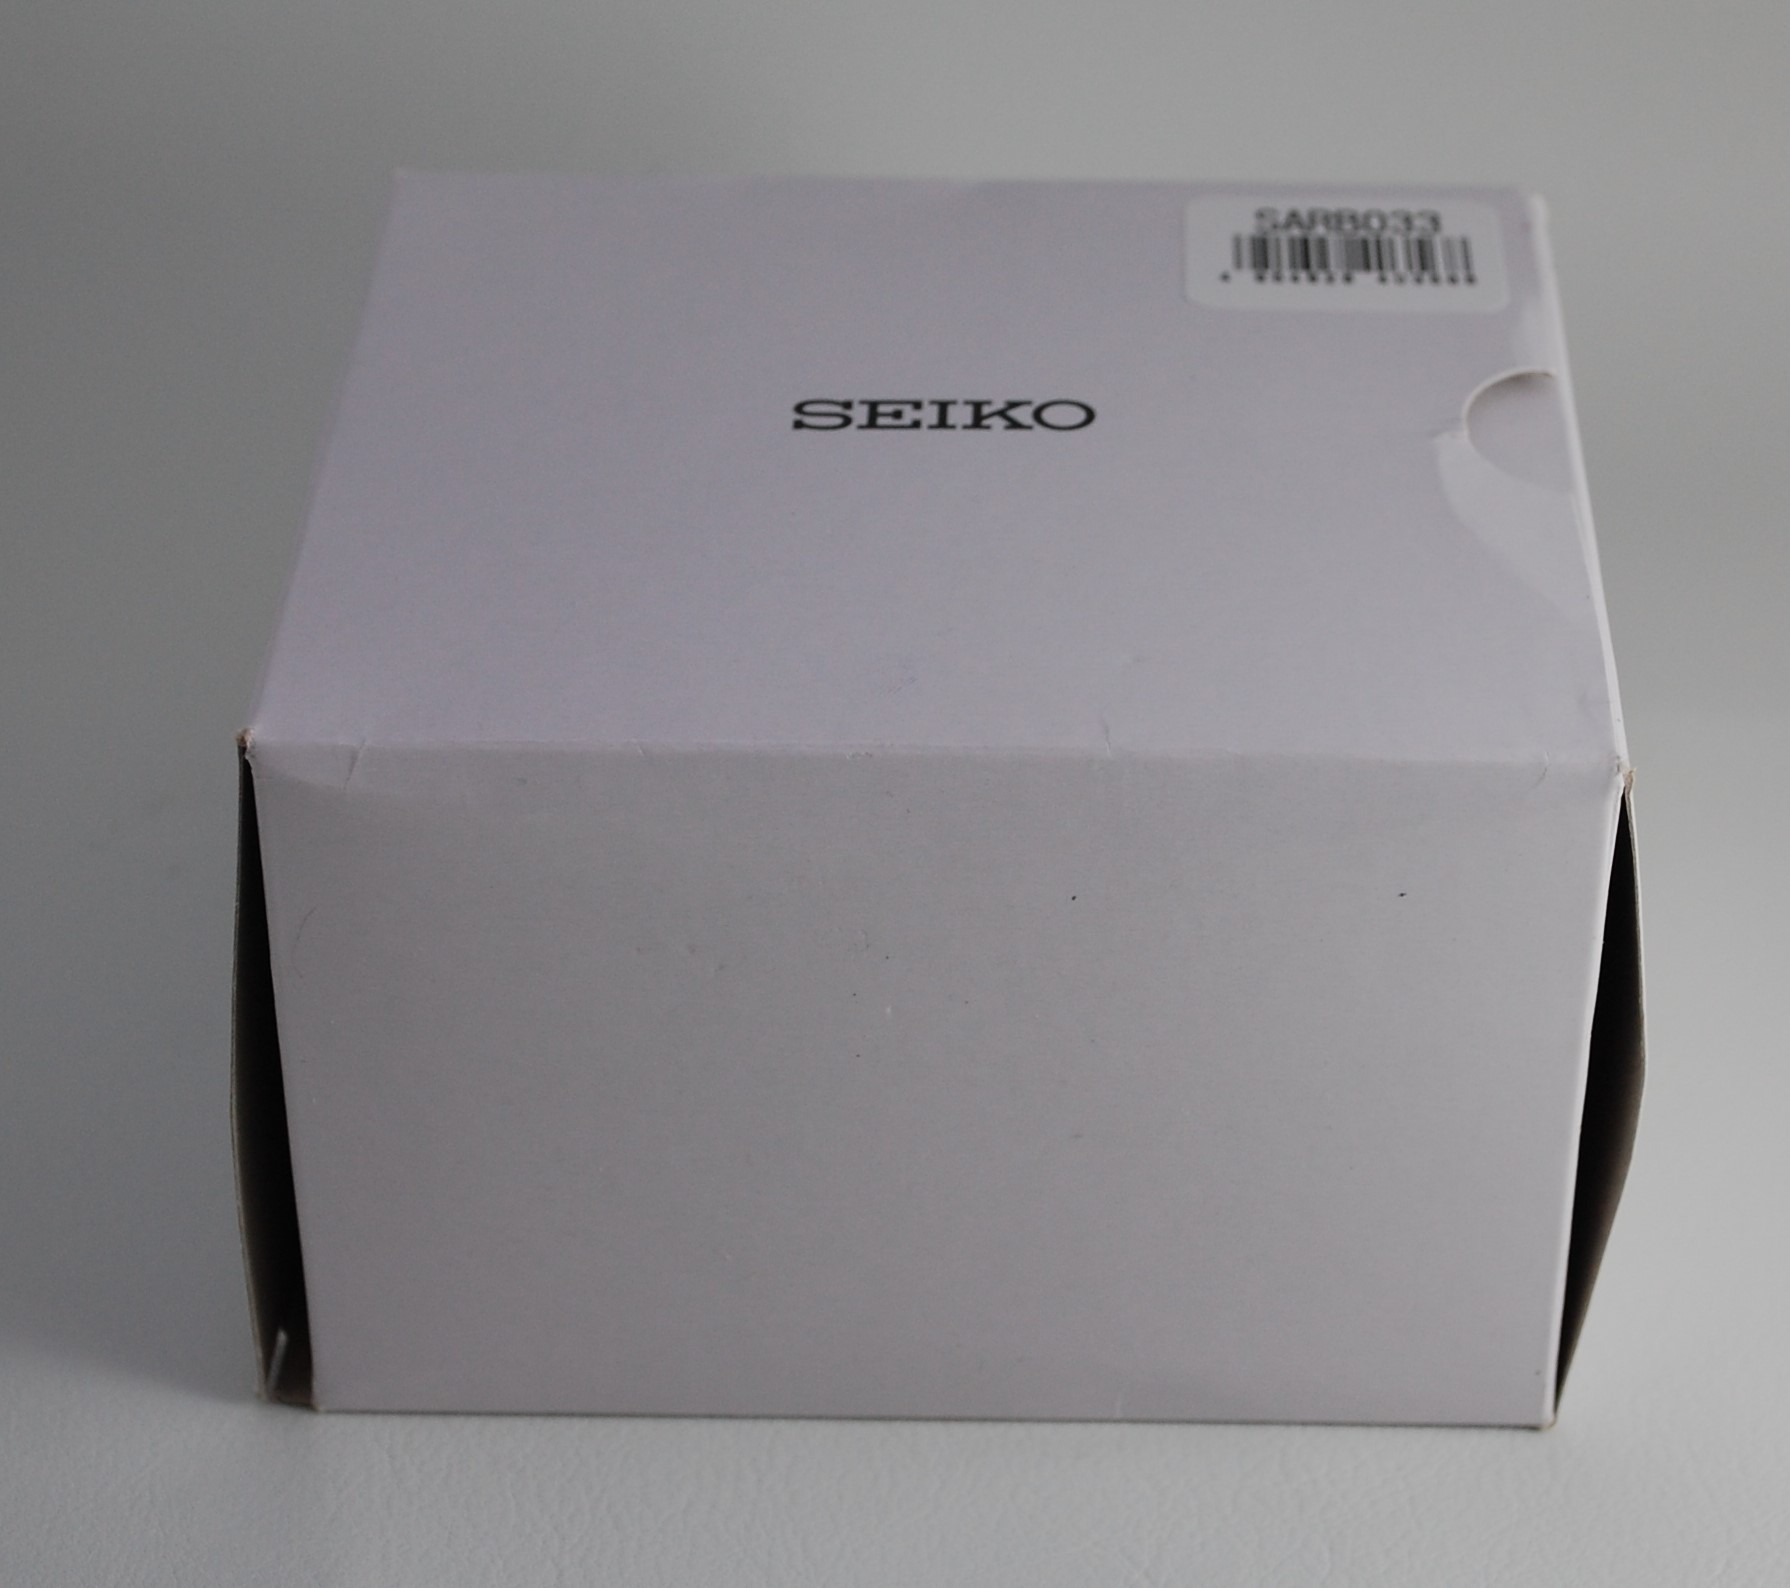 SOLD 2016 Seiko SARB033 with box and papers - Birth Year Watches